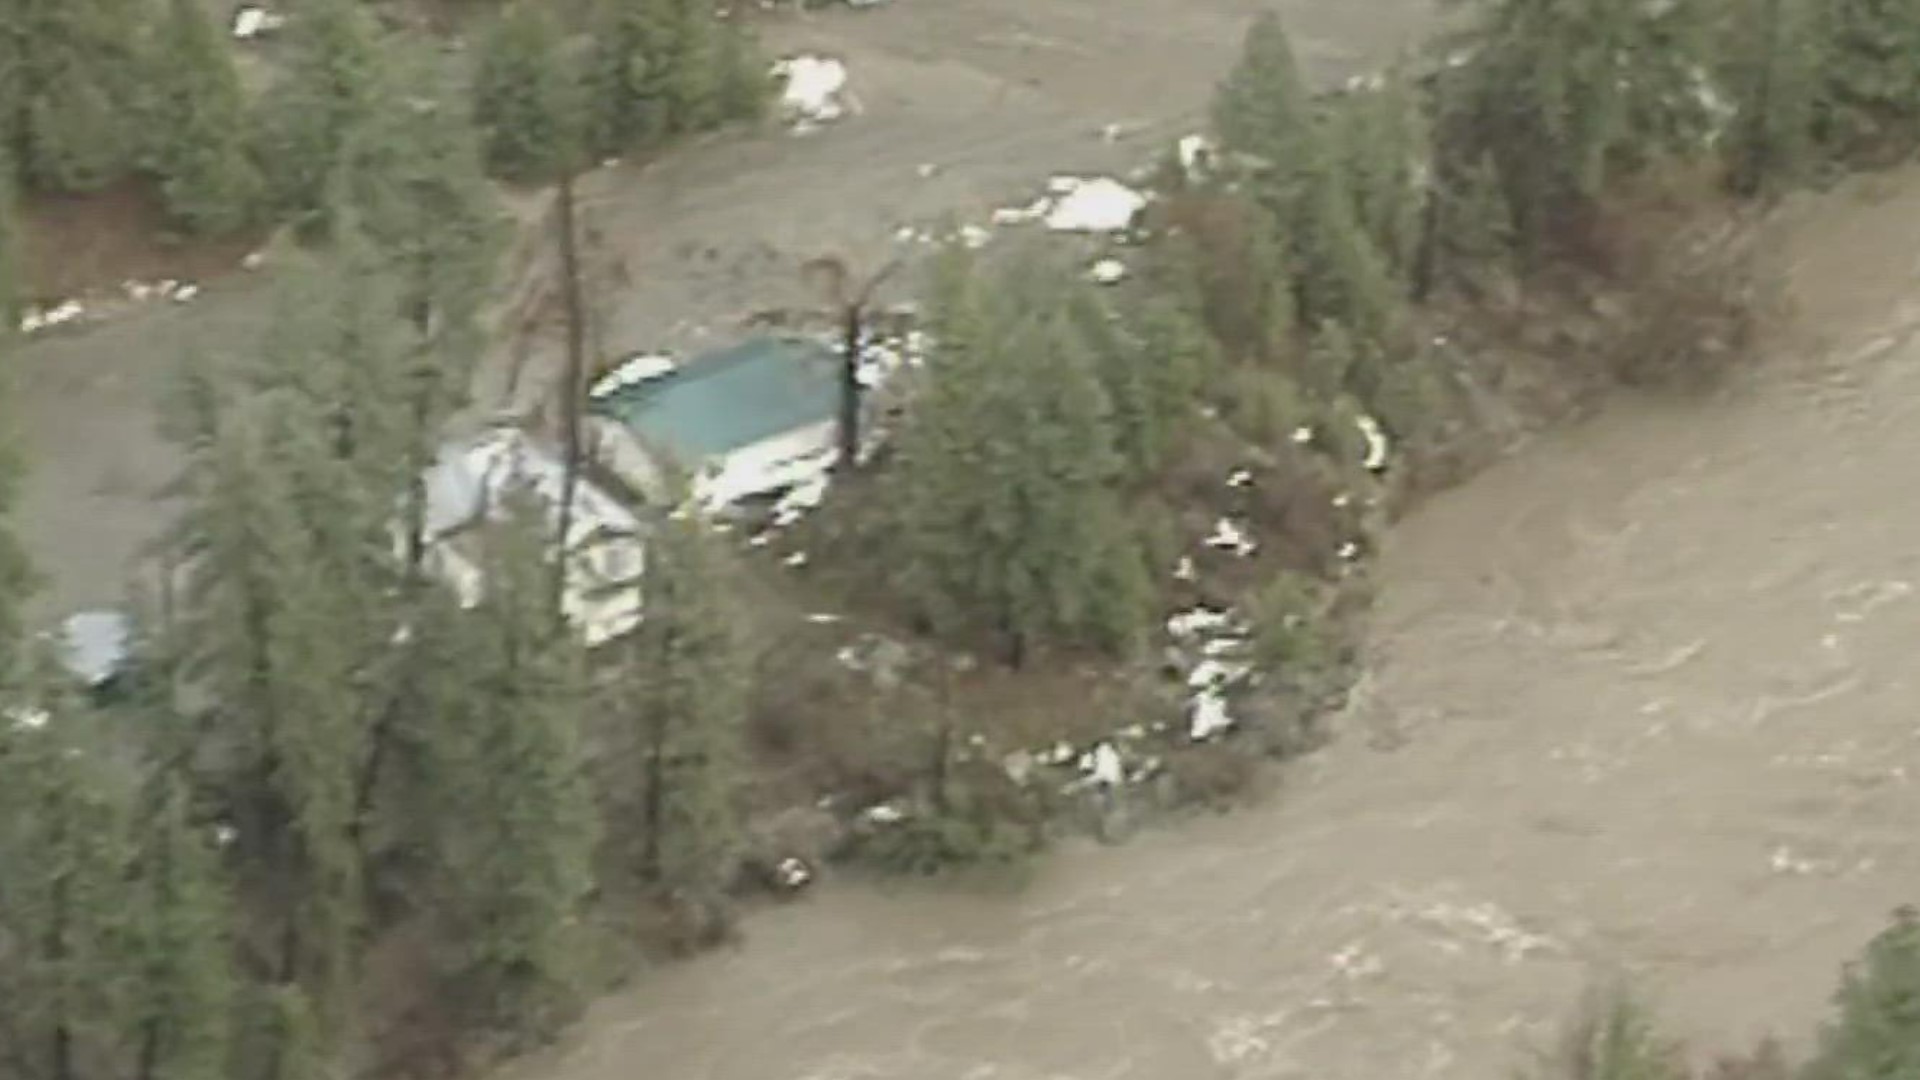 KTVB meteorologist Jim Duthie looks back at flooding from a quarter-century ago and what happened to Lower Banks when a mountainside couldn't hold any more water.